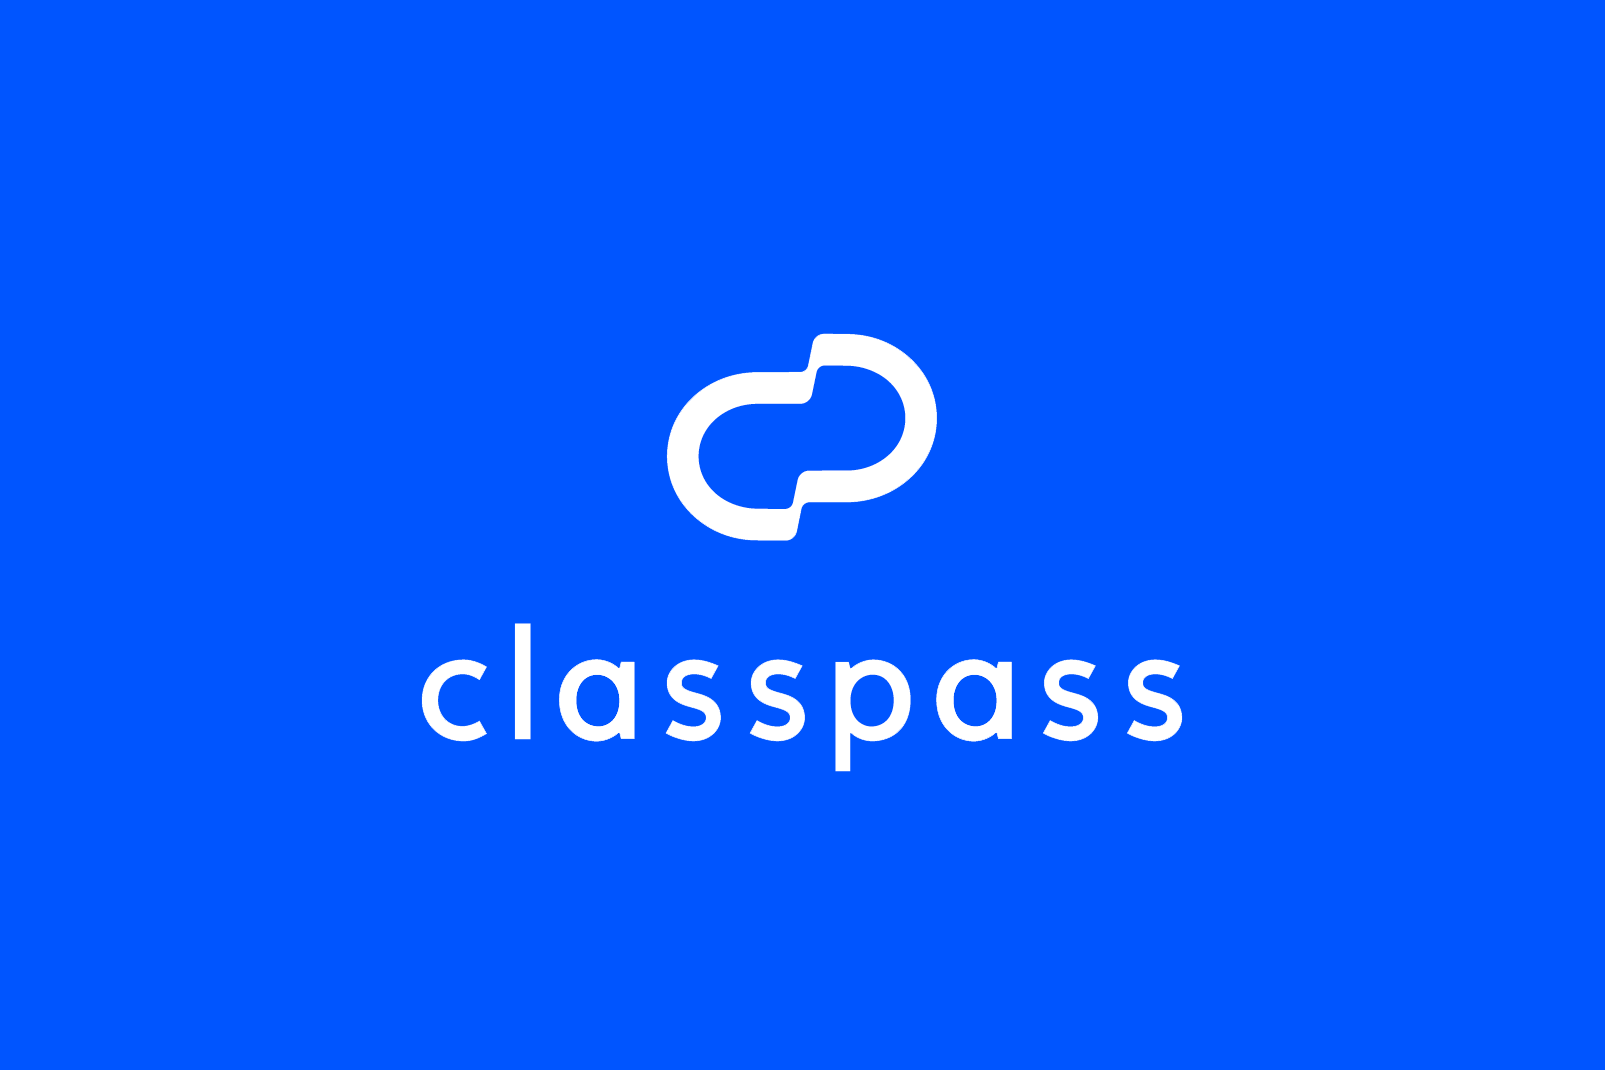 Club Yoga: Read Reviews and Book Classes on ClassPass